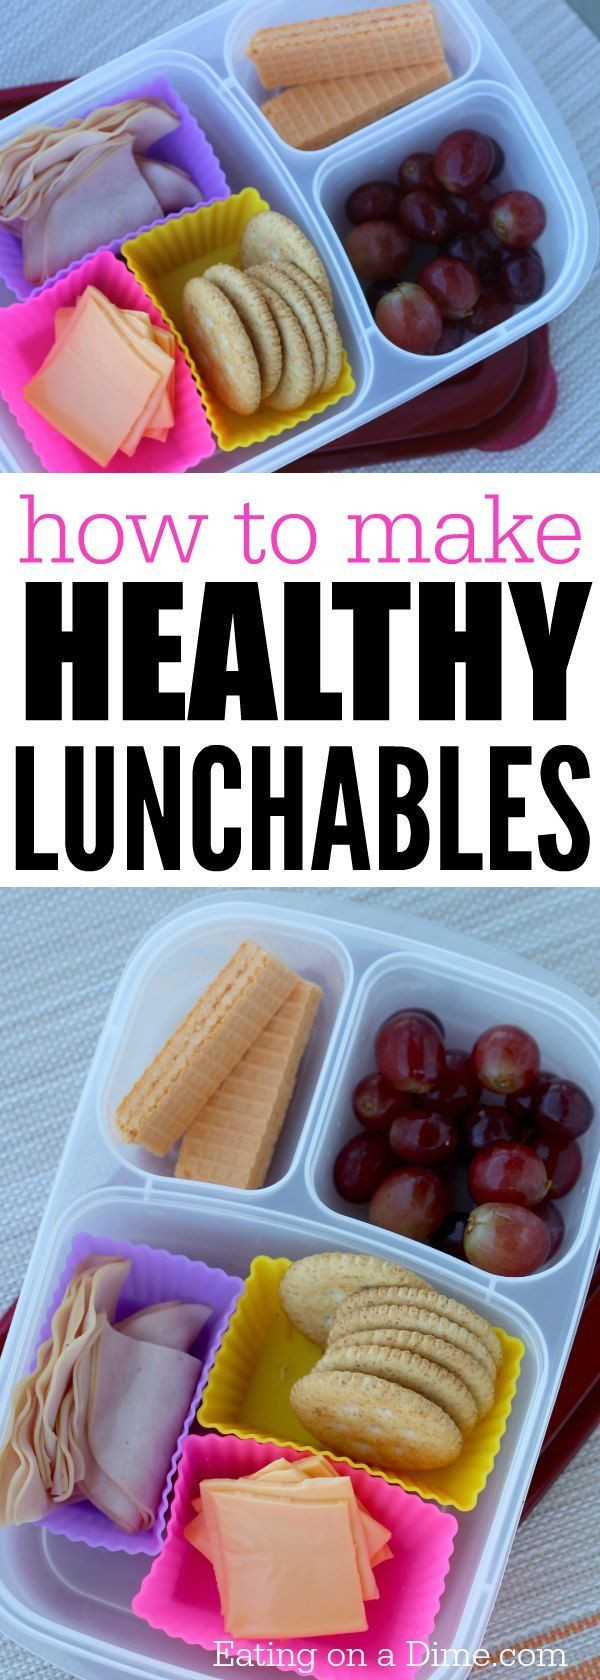 Healthy Homemade Lunches
 How to make Healthy Lunchables Homemade lunchables